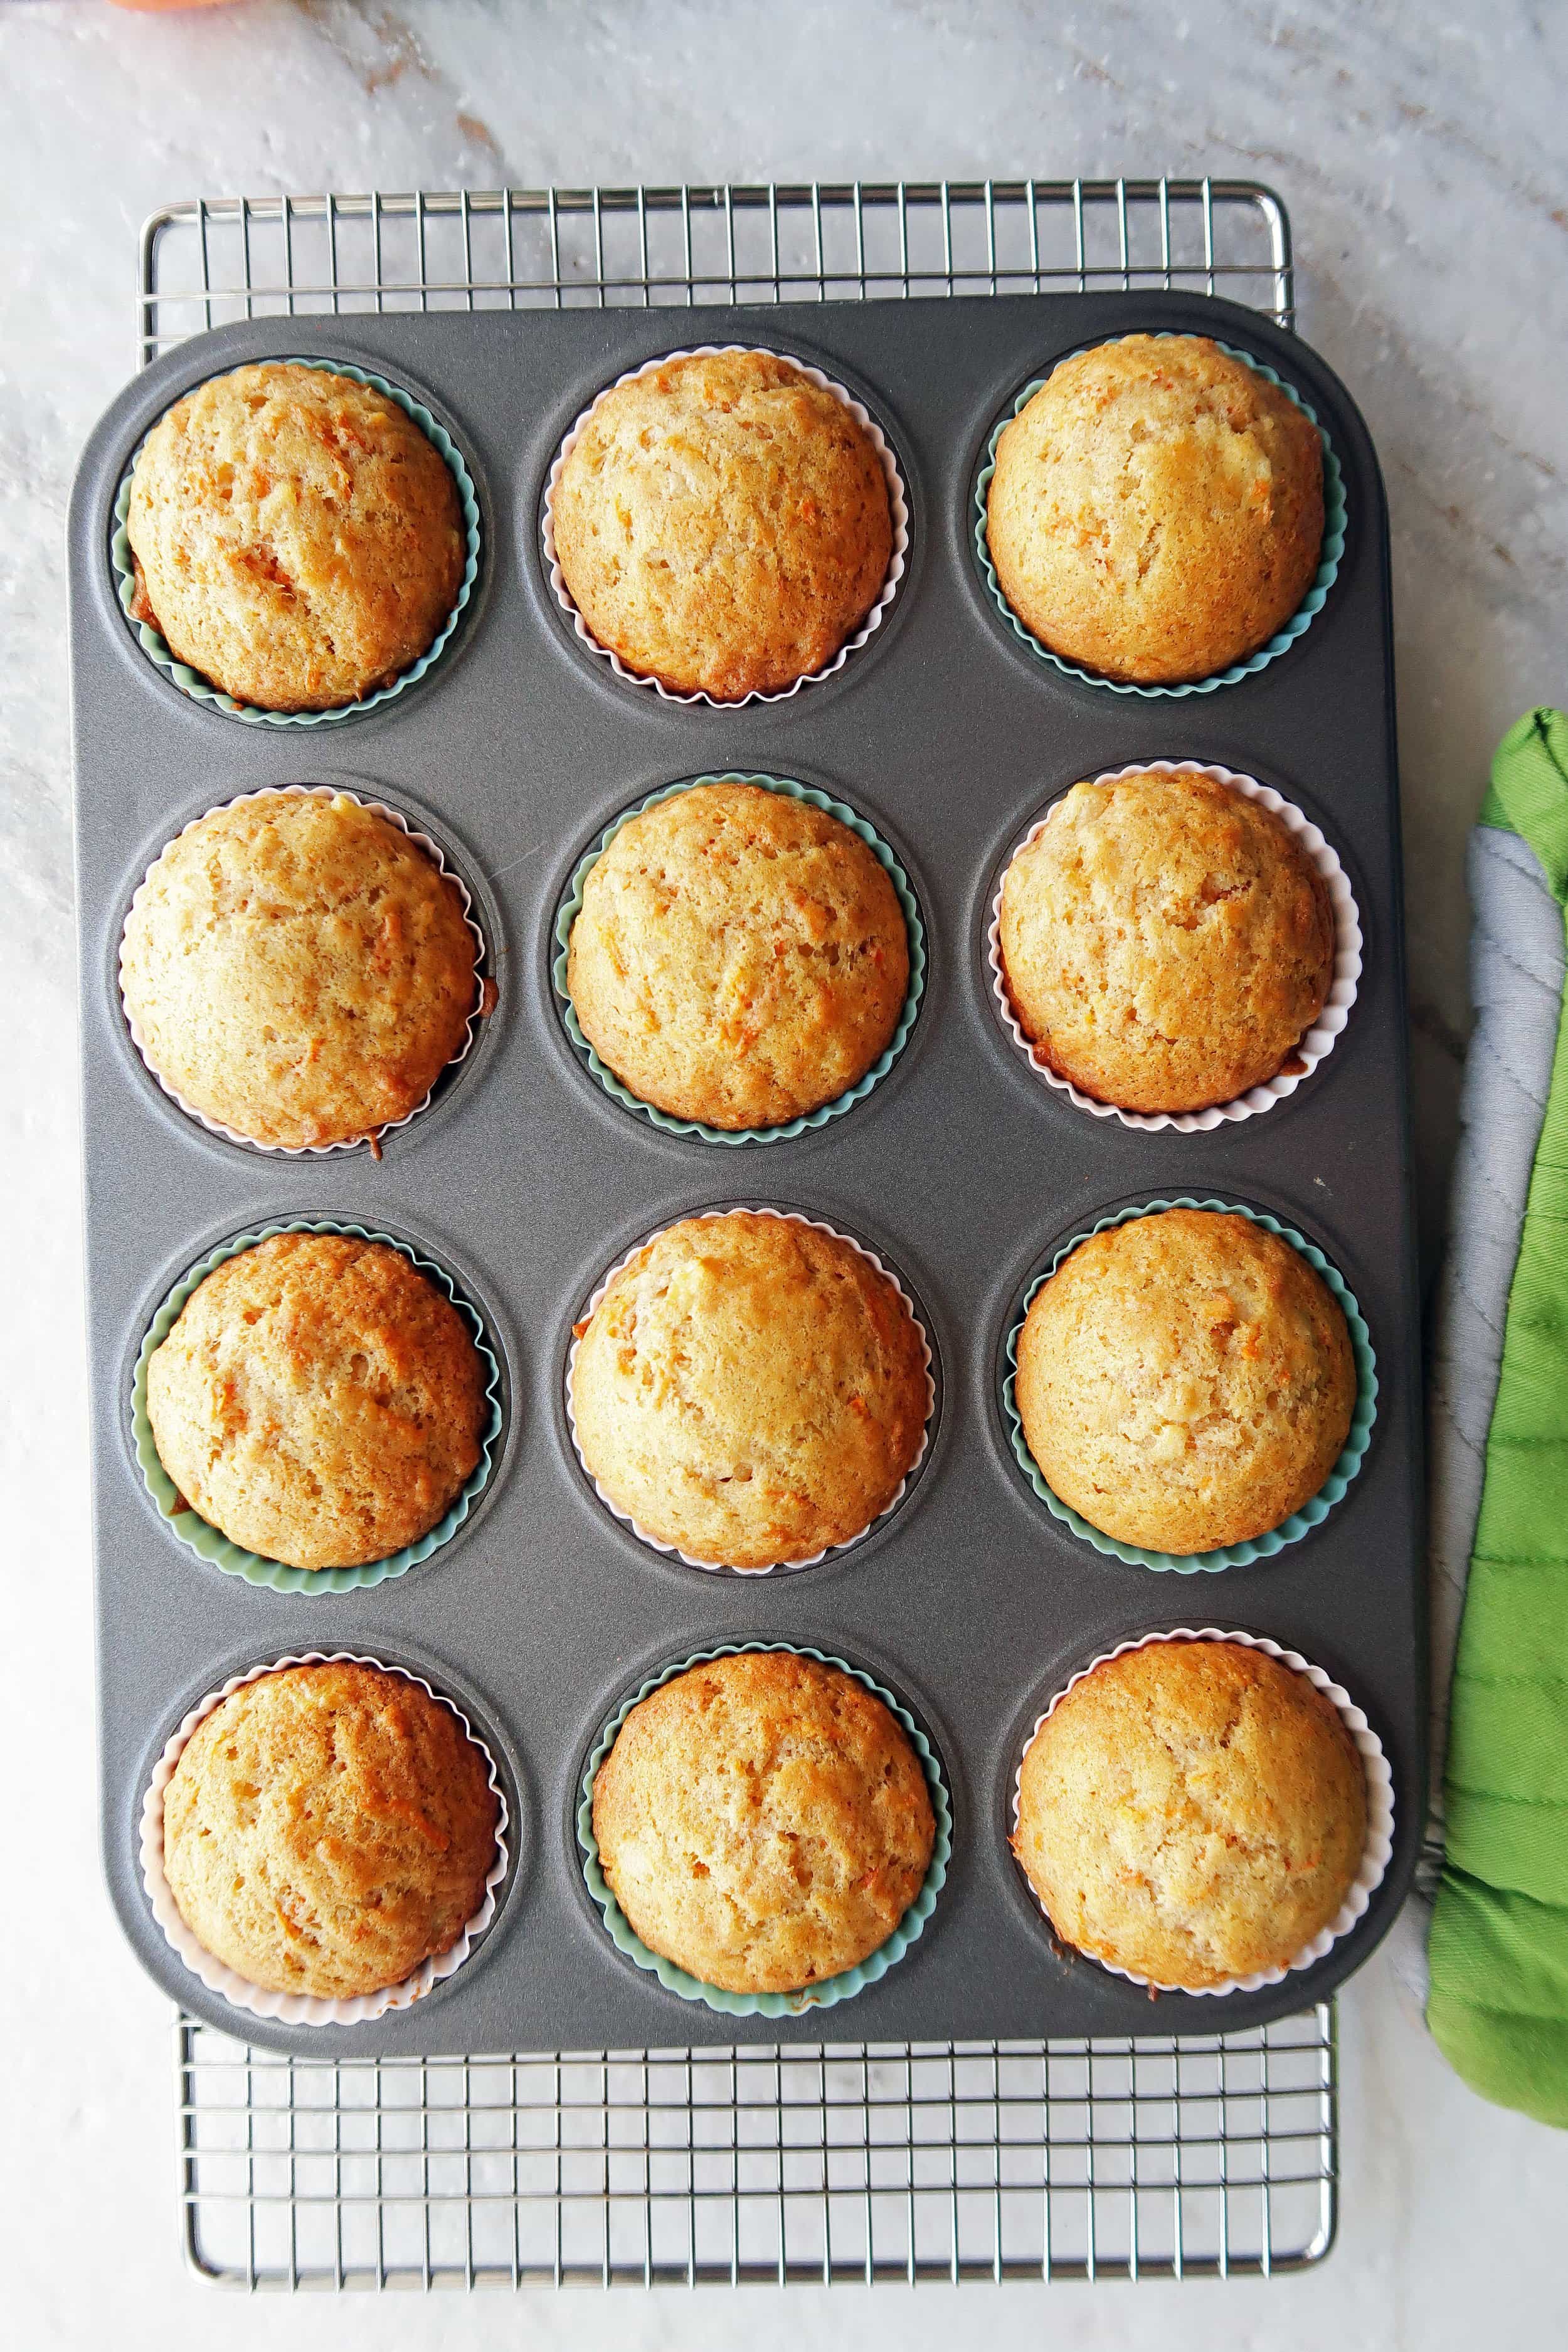 A dozen golden brown baked Easy Carrot Pineapple Muffins in a muffin tin.